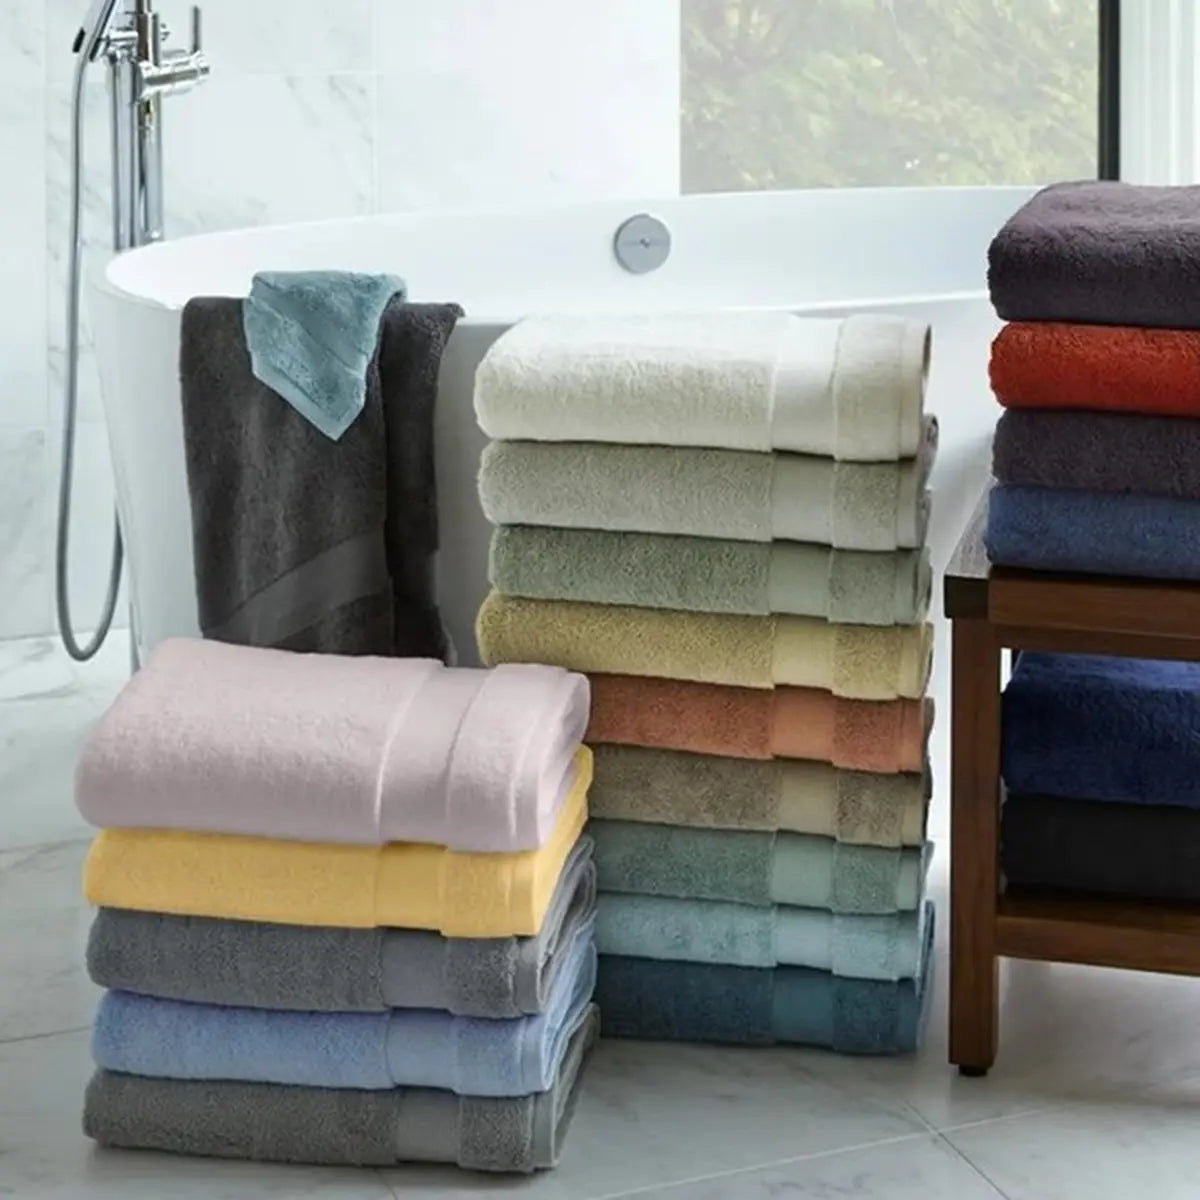 Sferra Bello Bath Towels in various colors stacked together in a bathroom